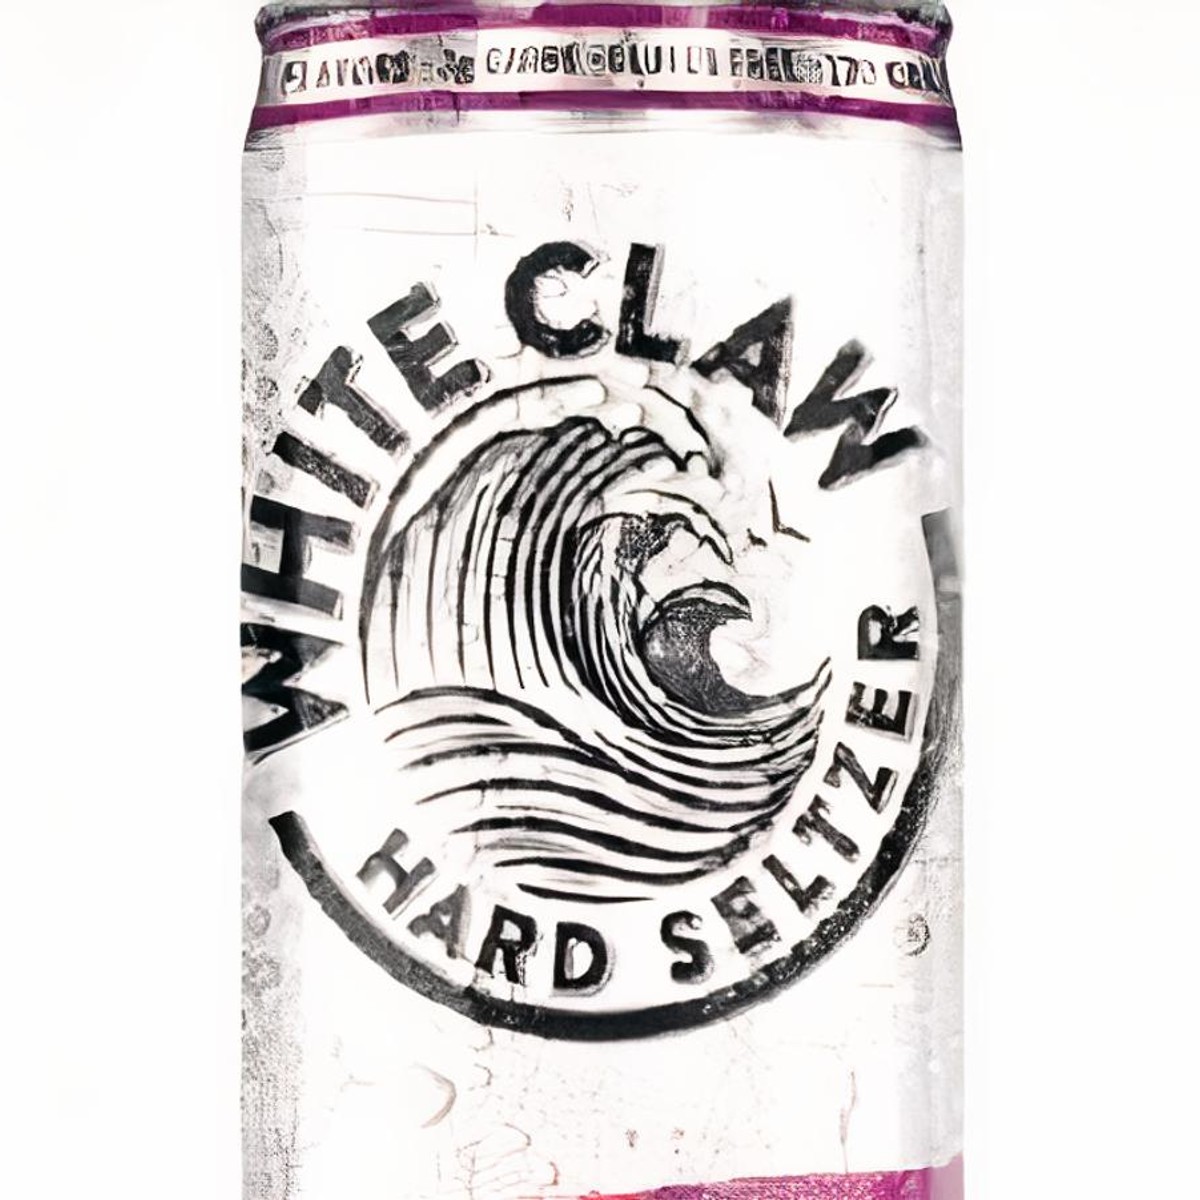 White Claw Hard Seltzer, Black Cherry - 6 pack, 12.0 fl oz cans